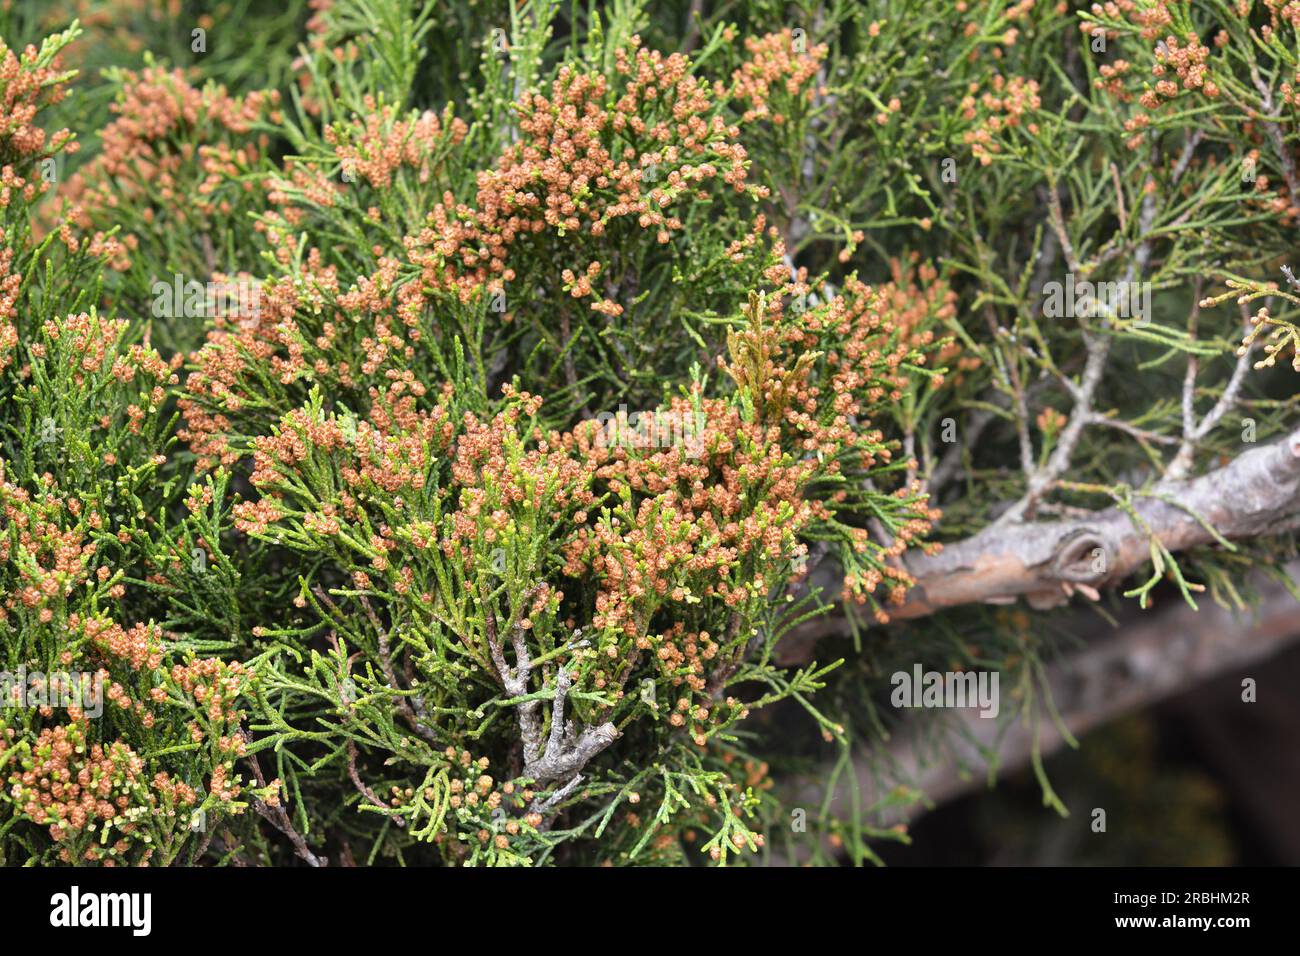 Juniperus virginiana with yellow male cones close up.  Eastern Red Cedar (Juniperus virginiana) Male cones are small and have a dull mustard yellow co Stock Photo